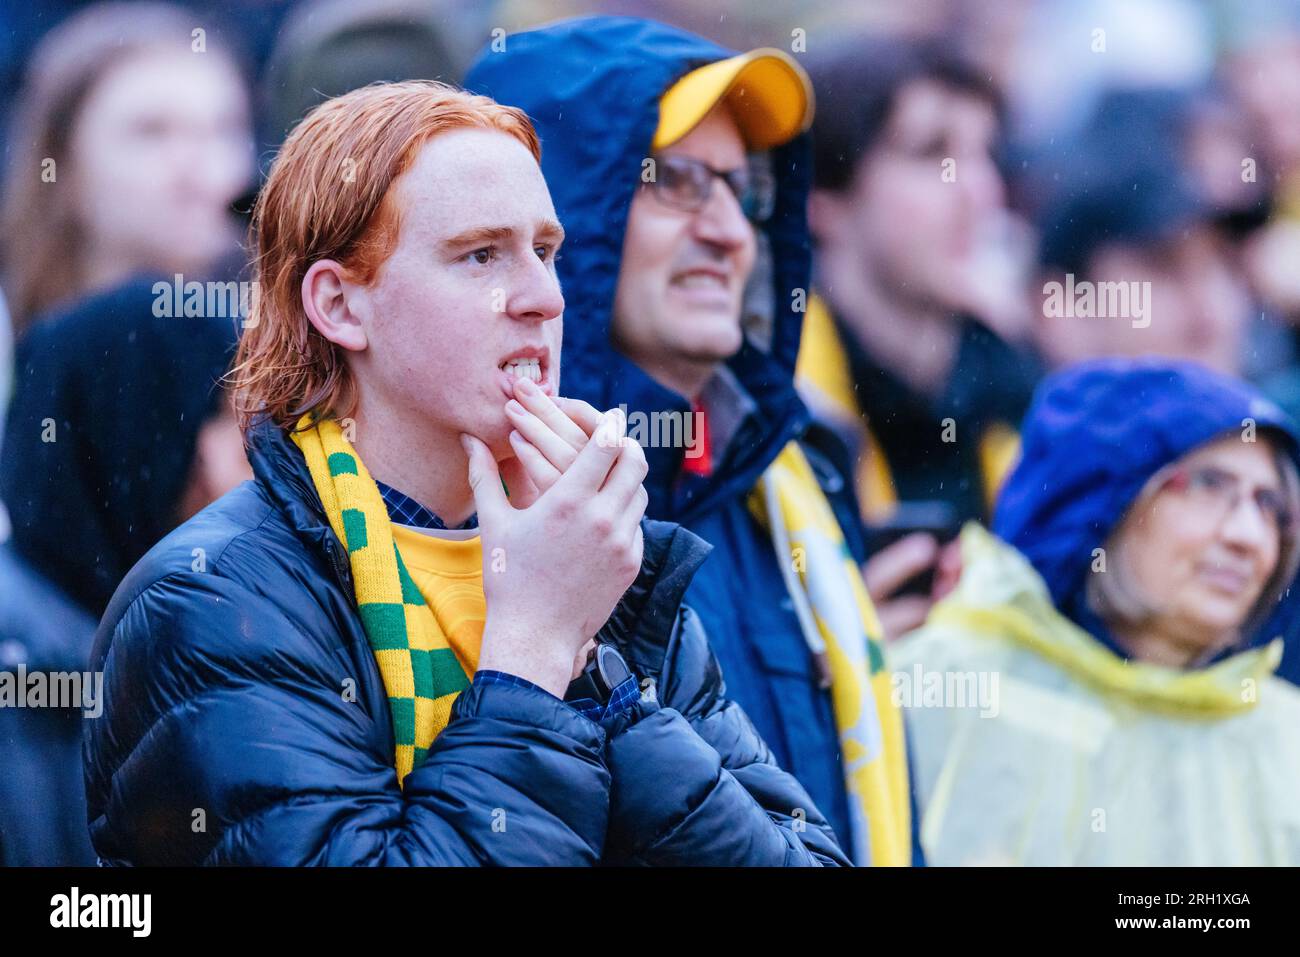 MELBOURNE, AUSTRALIA - AUGUST 12: Australian supporters at the Melbourne Fan Festival with capacity crowd watching Australian Matildas vs France Les B Stock Photo